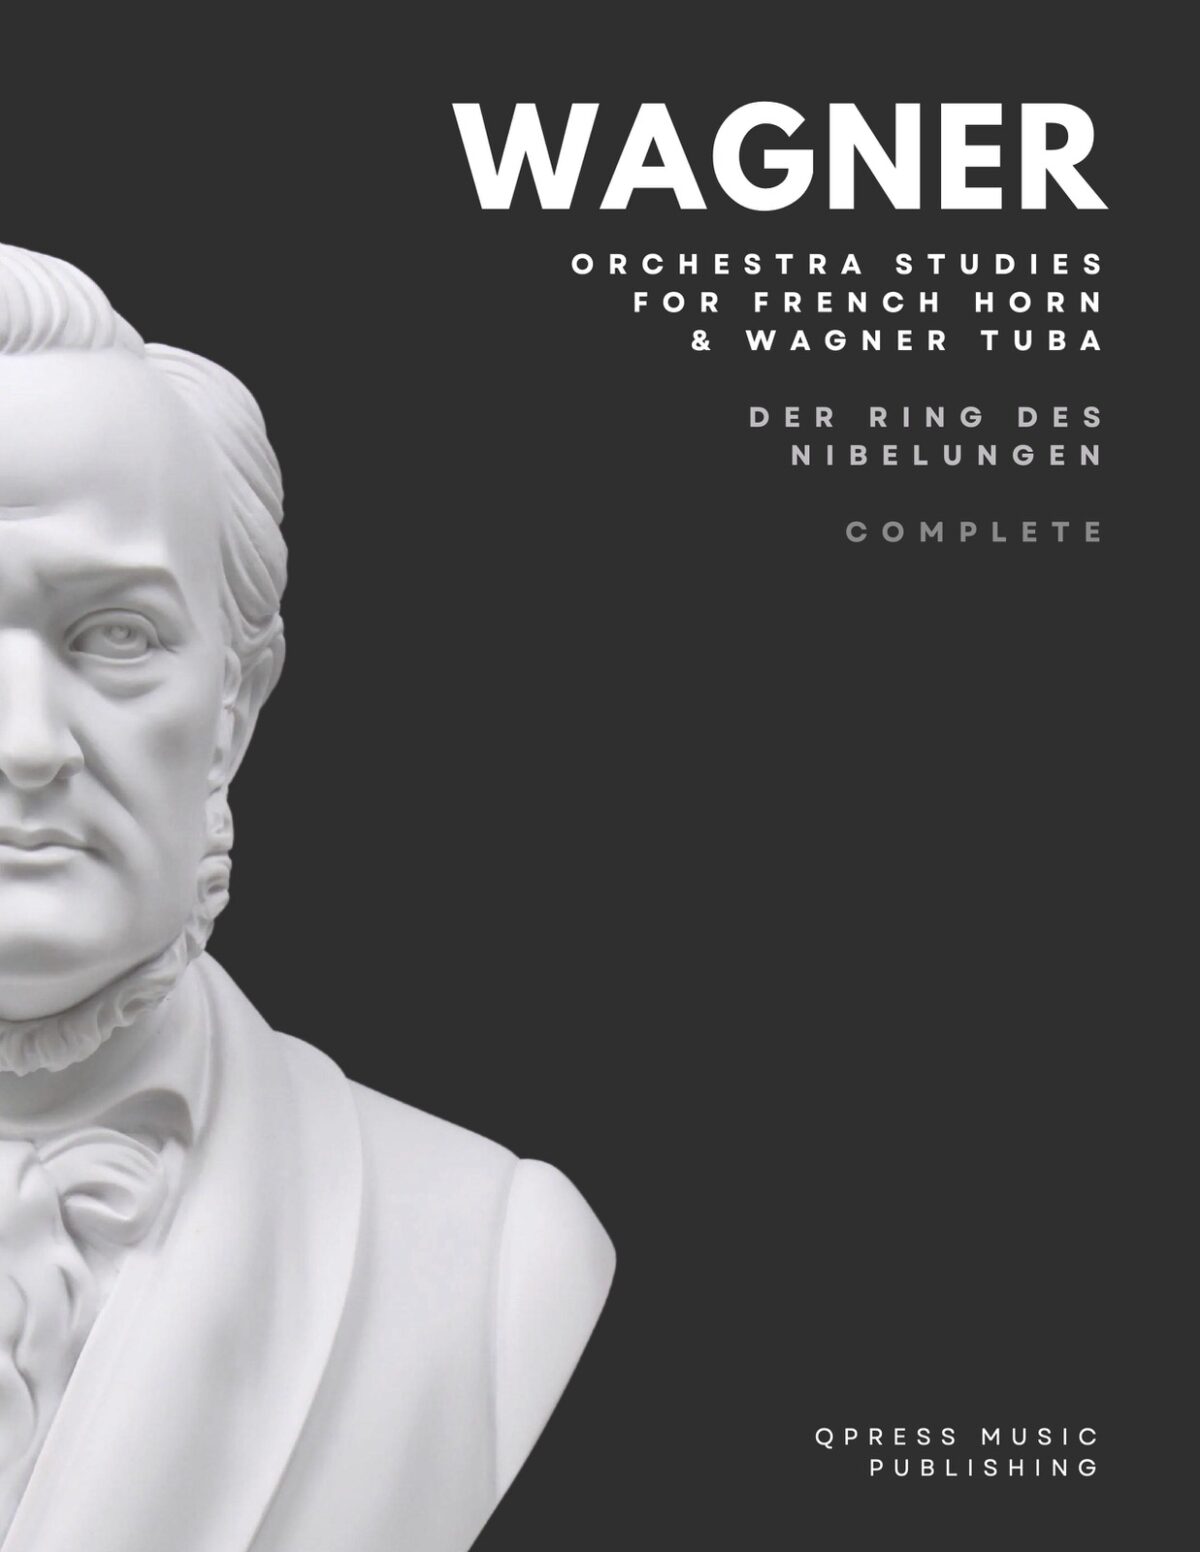 Wagner, Orchestra Studies (The Ring 1) for Horn-Wagner Tuba1 Featured-1